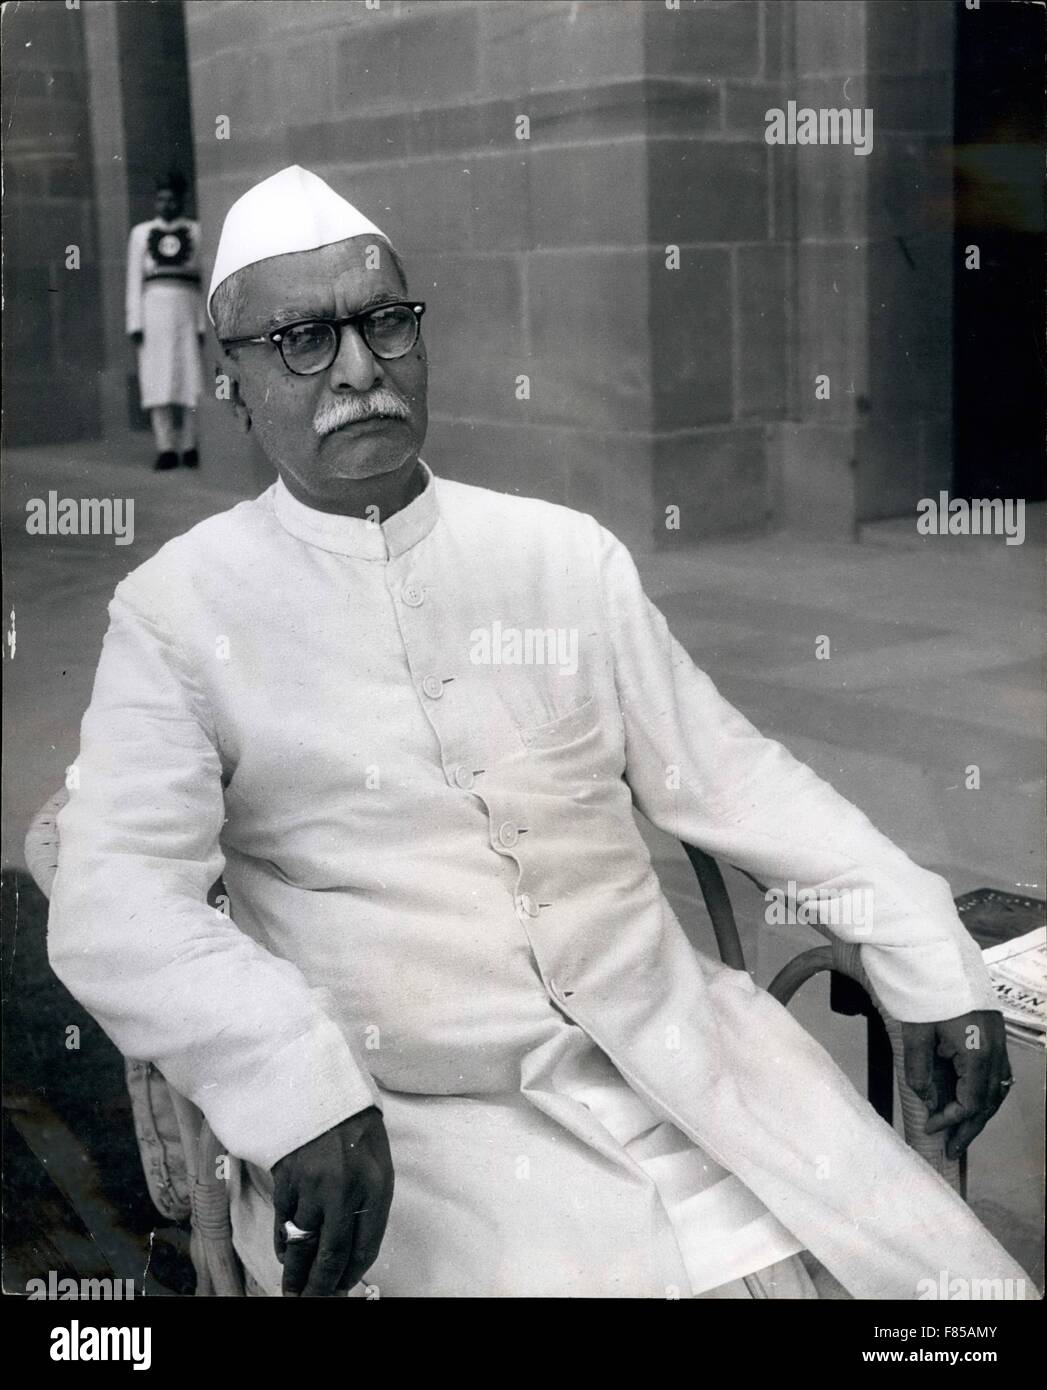 1958 - The president of India, dr.Rajendra prasad relaxes on he terrace of of his palace in new Delhi. interview with India president: the rarely photographer president of India granted a photographic interview to keystone's photograph norace Abraham at the rashtrapati Bhavan (white house), formerly the viceregal palace in new Delhi, and now the official residence of the president of India. Greatly loved and respected, the president, the hon. Dr. Rajendra prasad, M.a., m.l. ll.d was born in 1884 and has been president of his country since 1950. Formerly a lawyer he appended practice when he jo Stock Photo